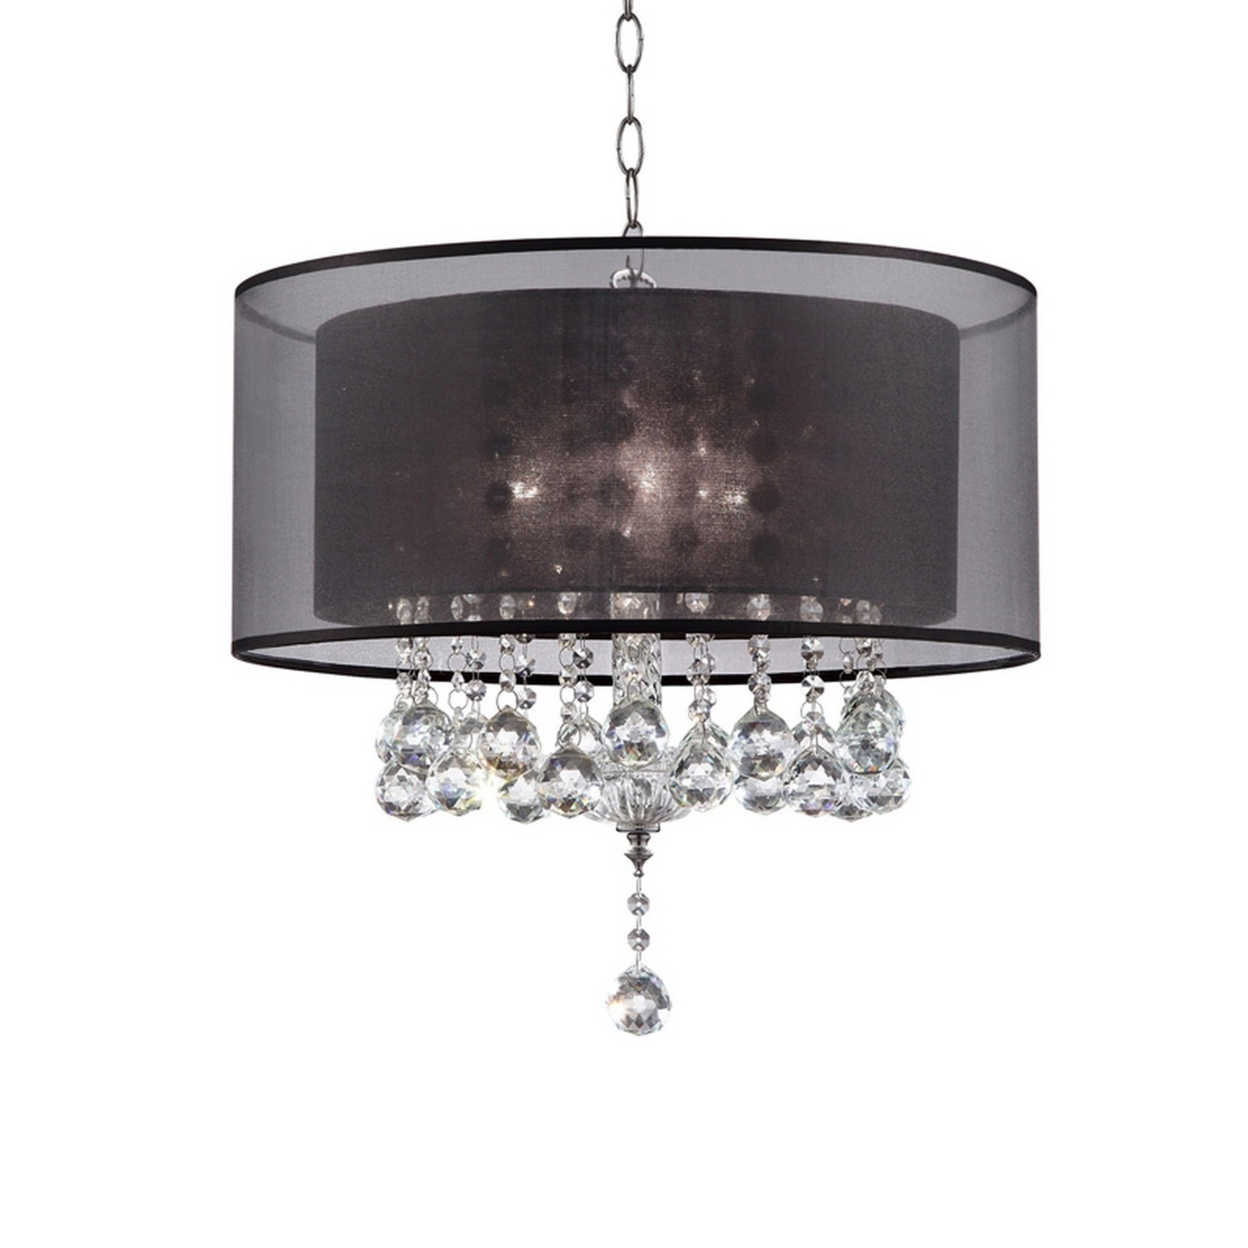 Dual Fabric Shade Ceiling Lamp With Hanging Crystal Accent, Clear And Black- Saltoro Sherpi